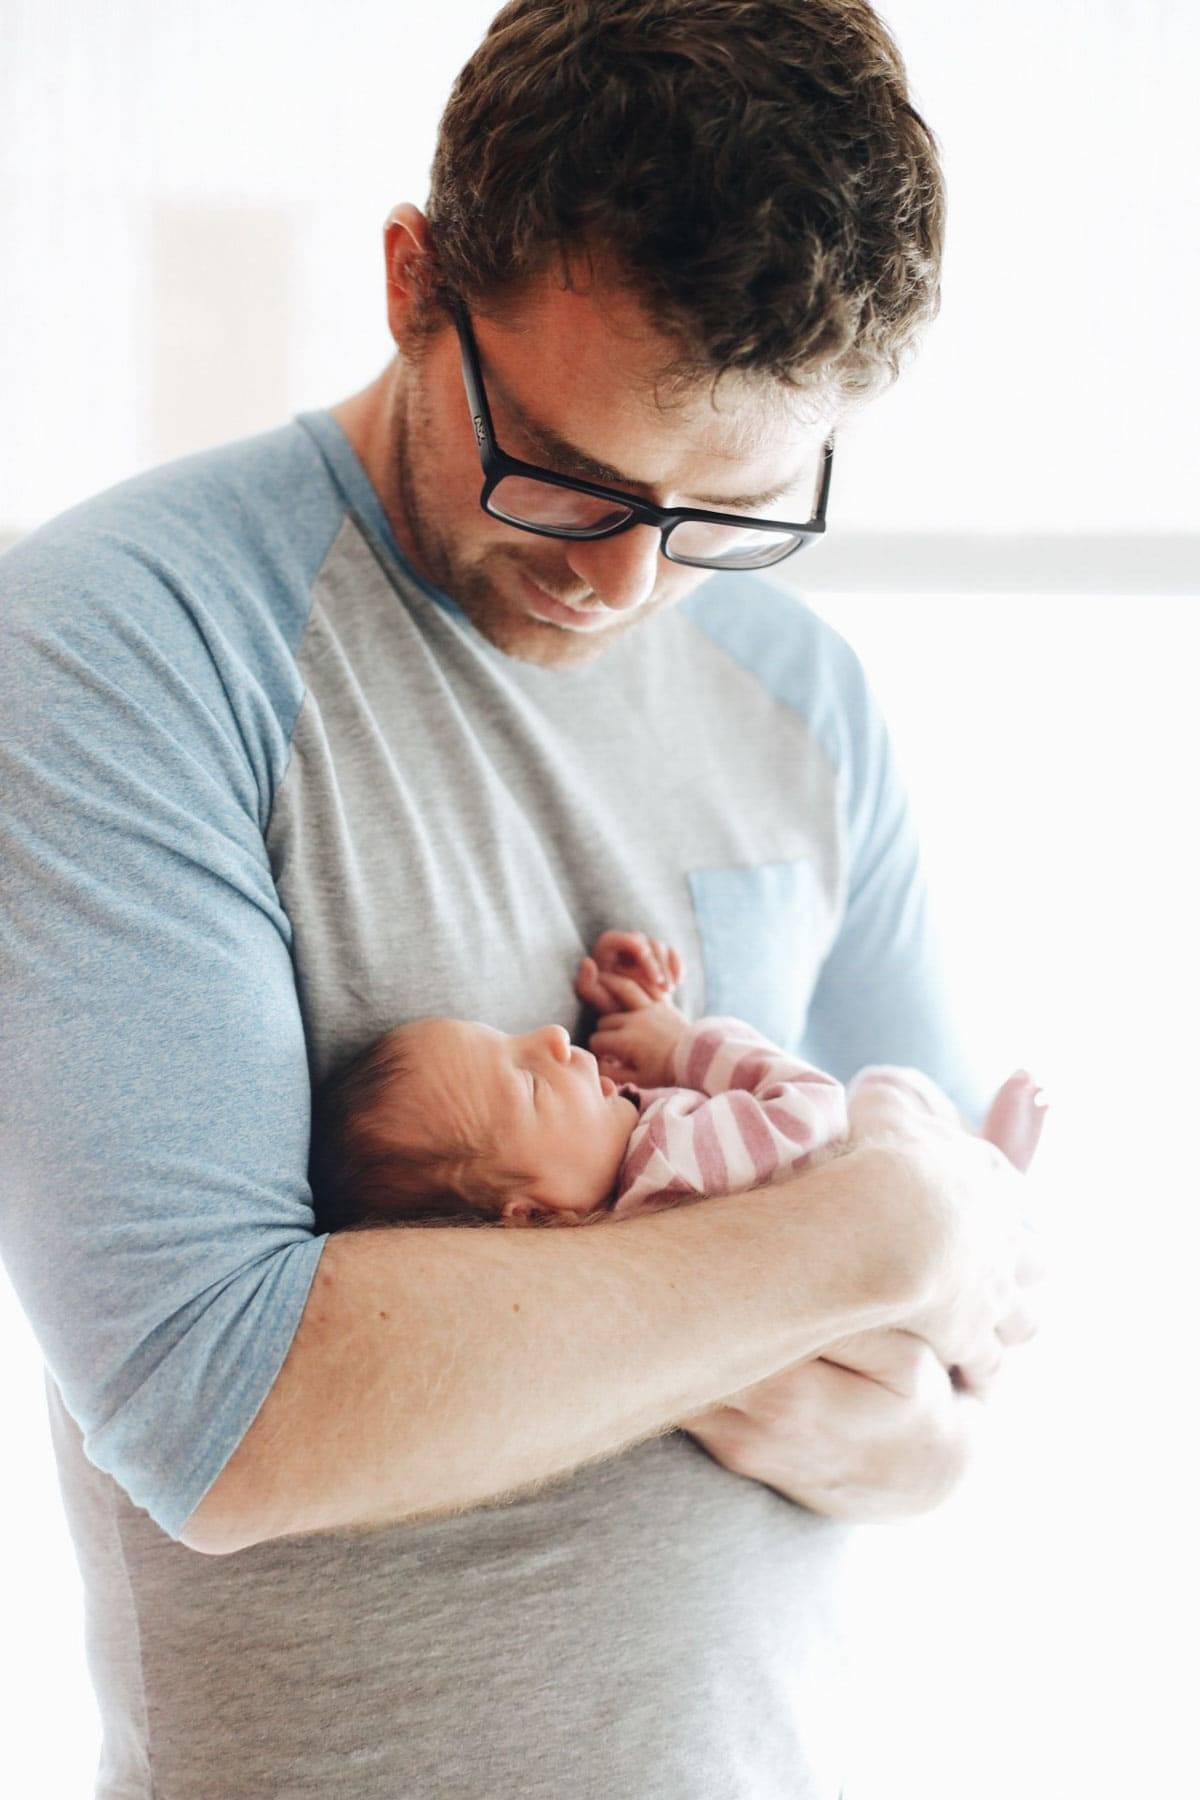 A man wearing glasses in a grayish blue shirt looking down on a tiny baby he is holding.